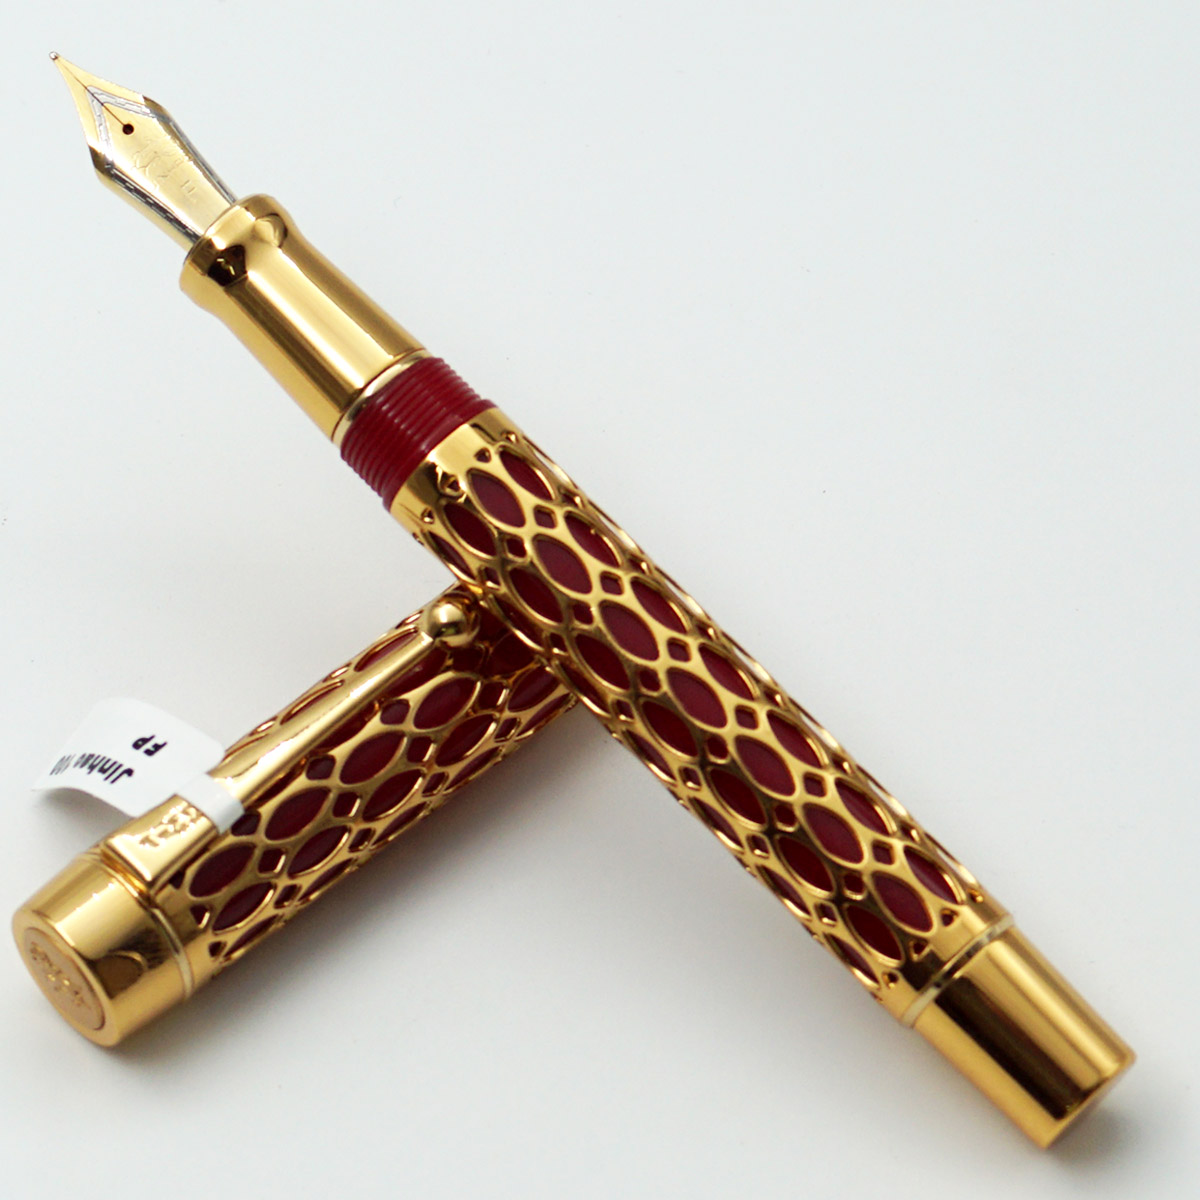 Jinhao 100 Red With Golden Color Small Resin Grid Design Body with Golden Clip Medium Nib Converter Type Fountain Pen SKU 24543